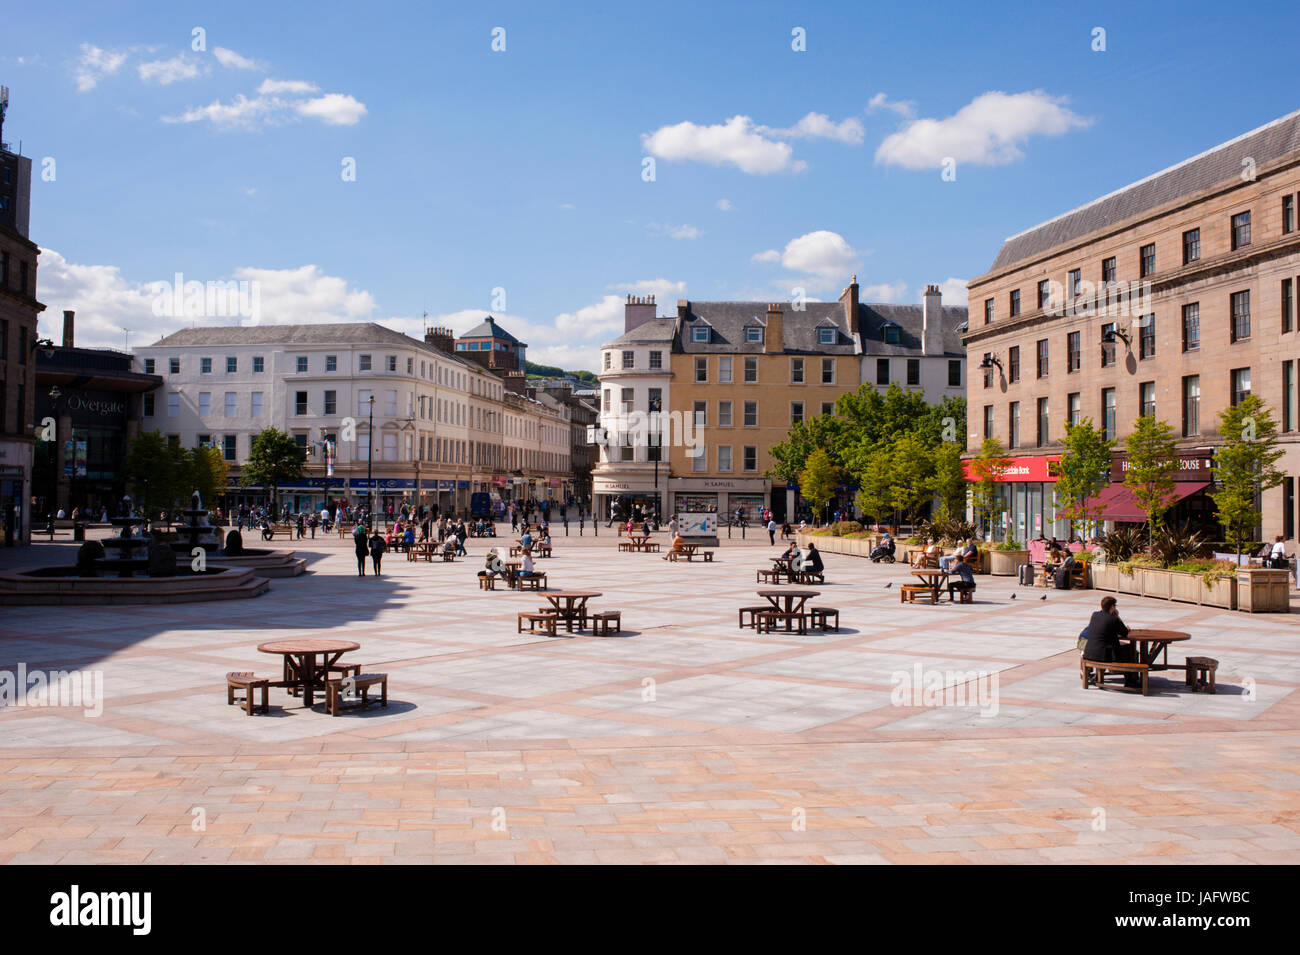 Dundee city square and The Caird Hall. Dundee, Scotland.Situated on the north bank of Firth of Tay Dundee is the fourth-largest city in Scotland. Stock Photo